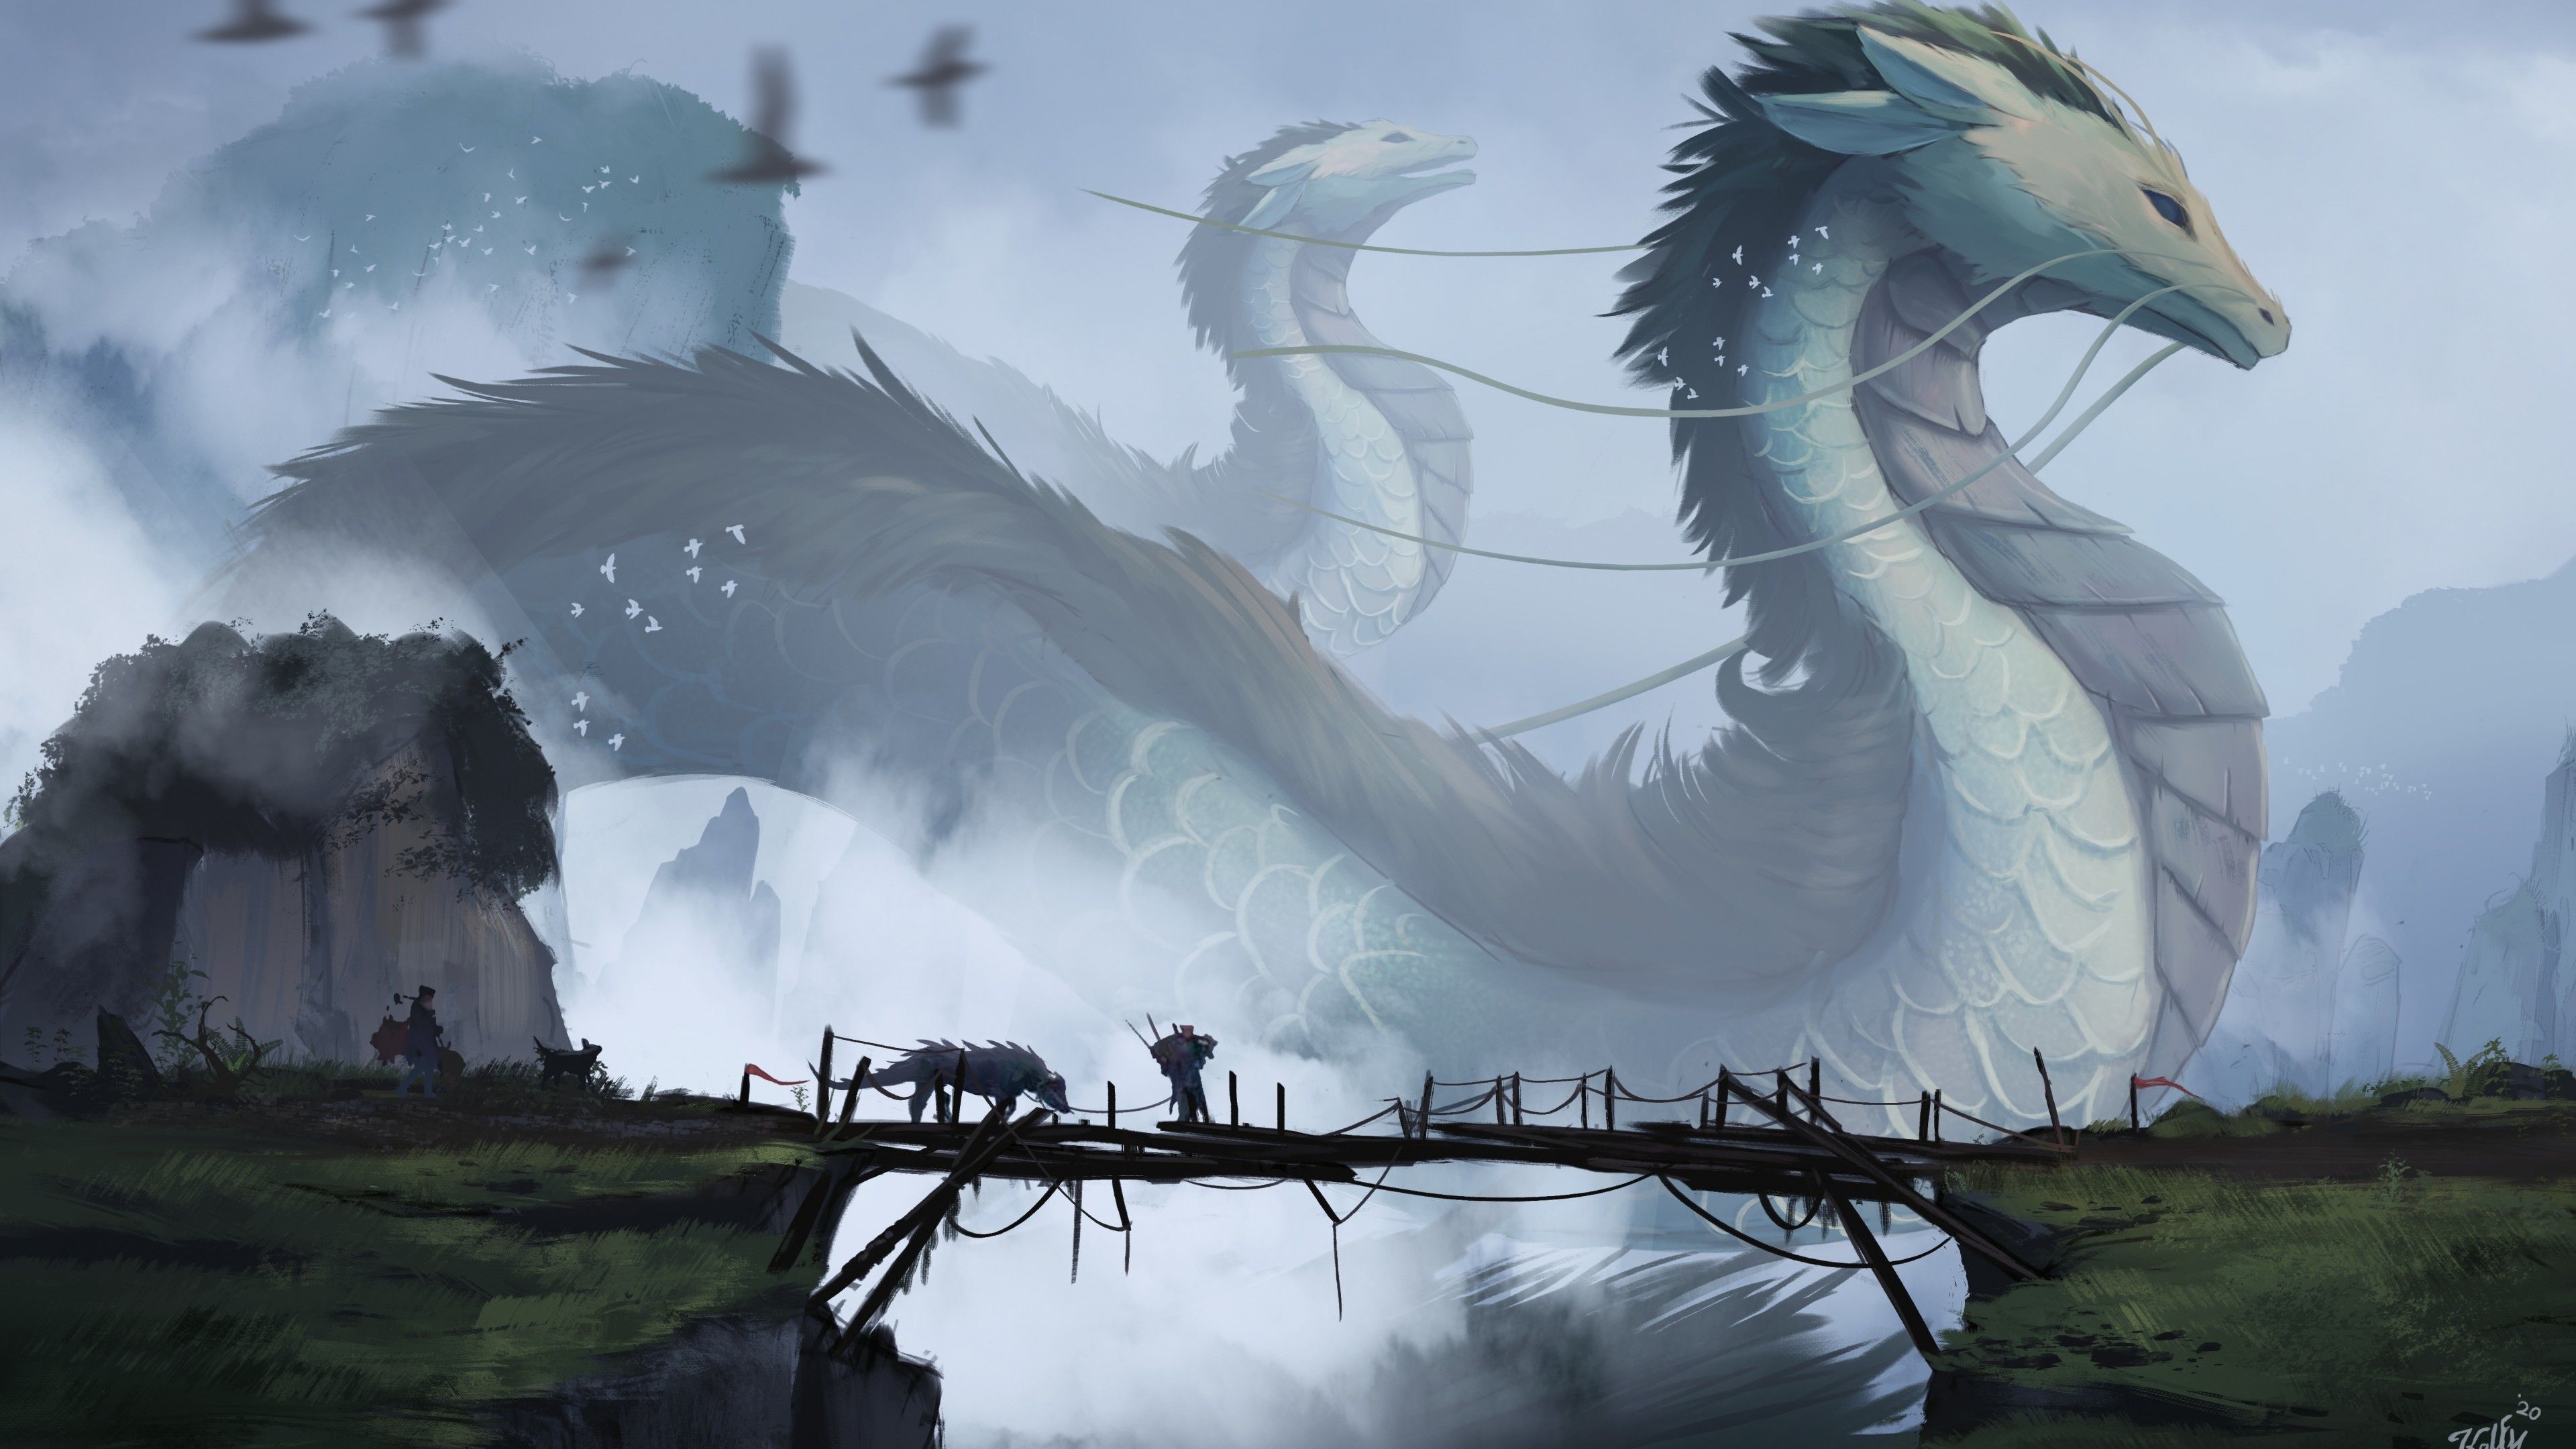 Dragon's 4K wallpaper for your desktop or mobile screen free and easy to download